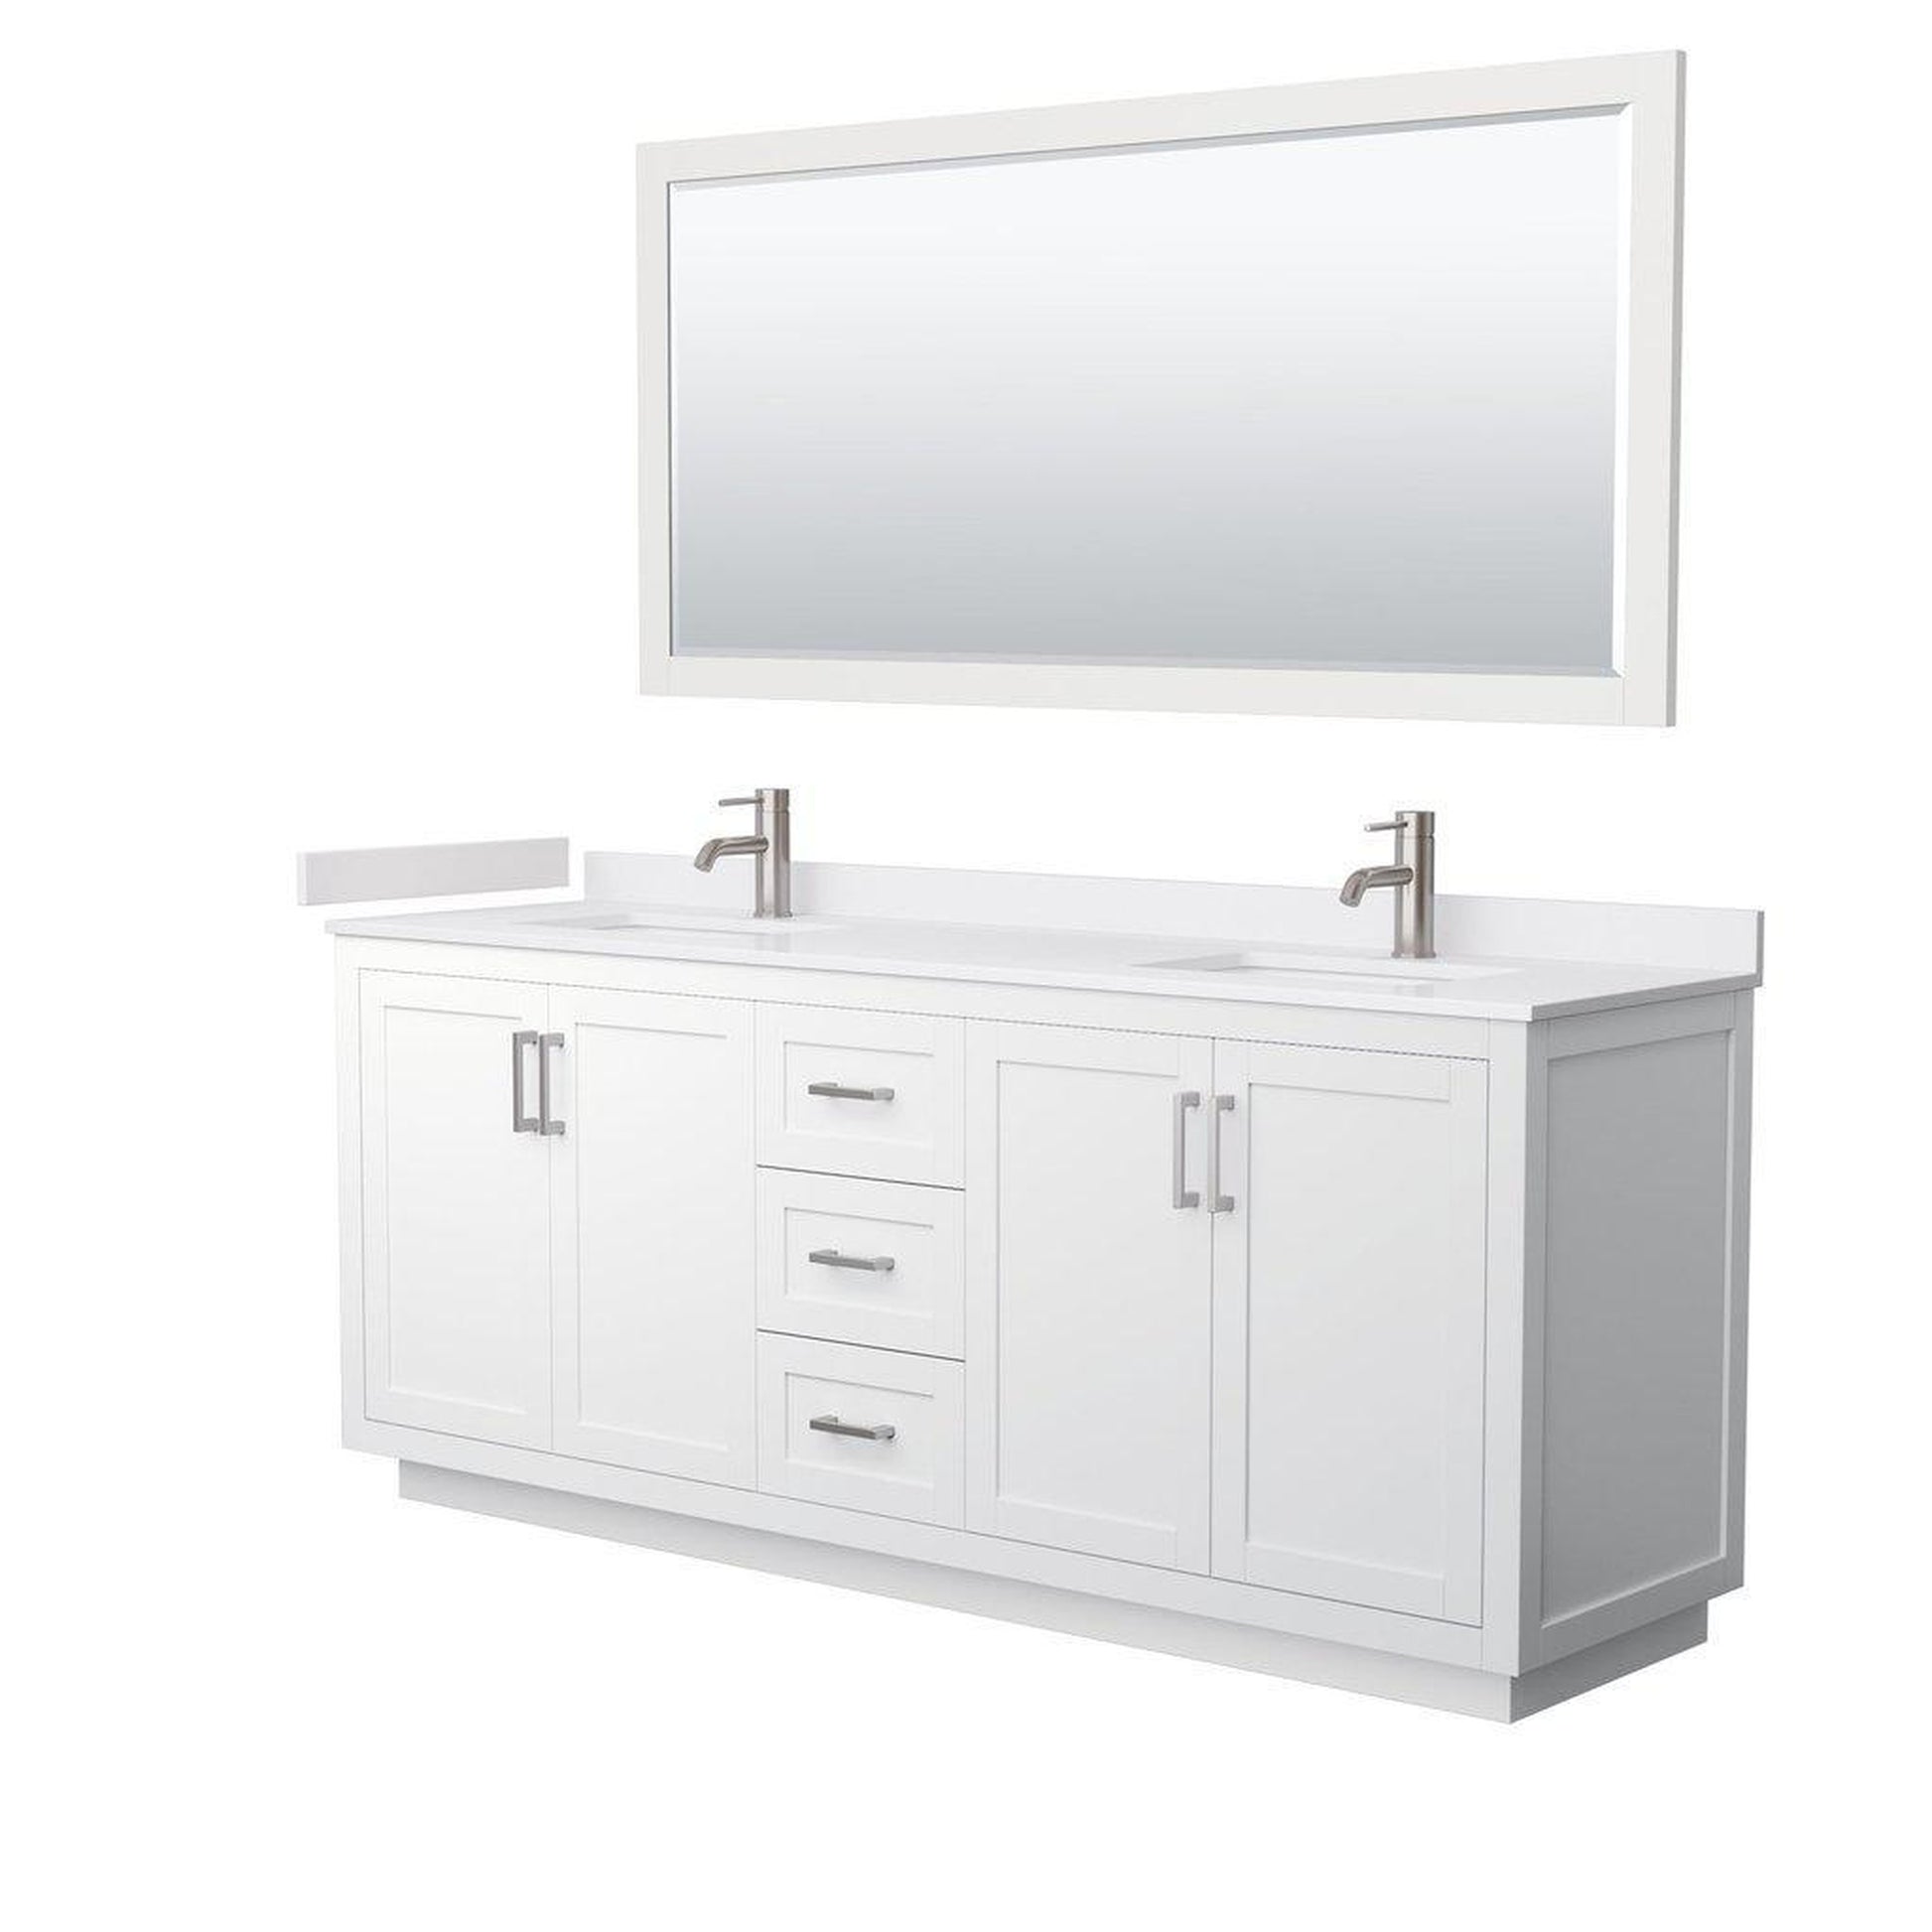 Wyndham Collection Miranda 80" Double Bathroom White Vanity Set With White Cultured Marble Countertop, Undermount Square Sink, 70" Mirror And Brushed Nickel Trim